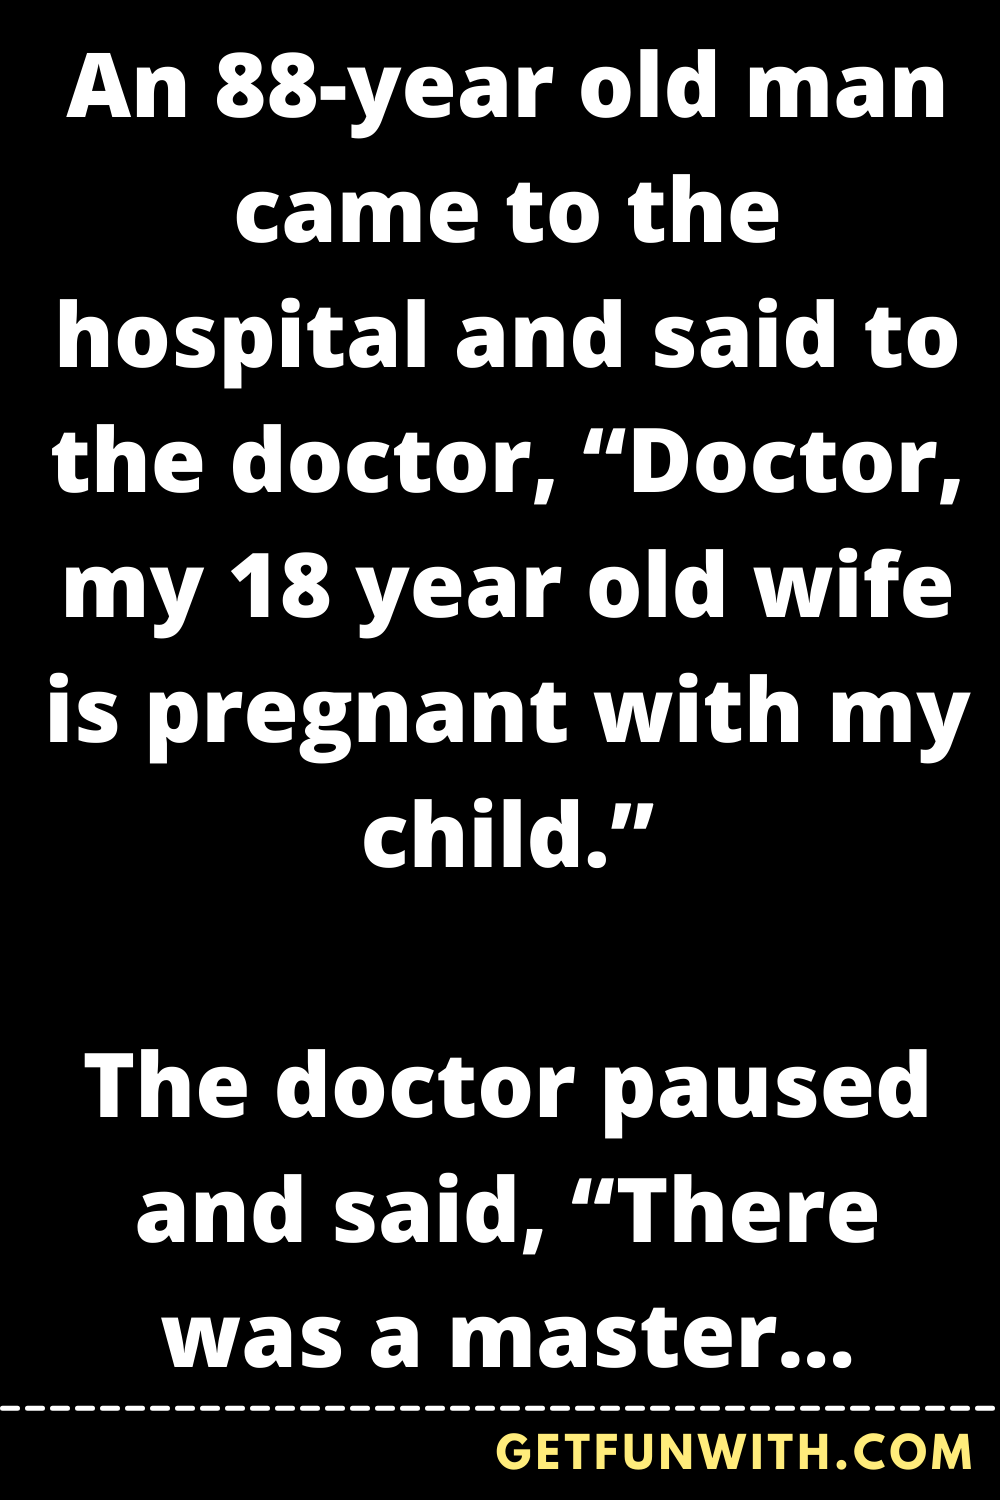 An 88-year old man came to the hospital and said to the doctor, “Doctor, my 18 year old wife is pregnant with my child.”